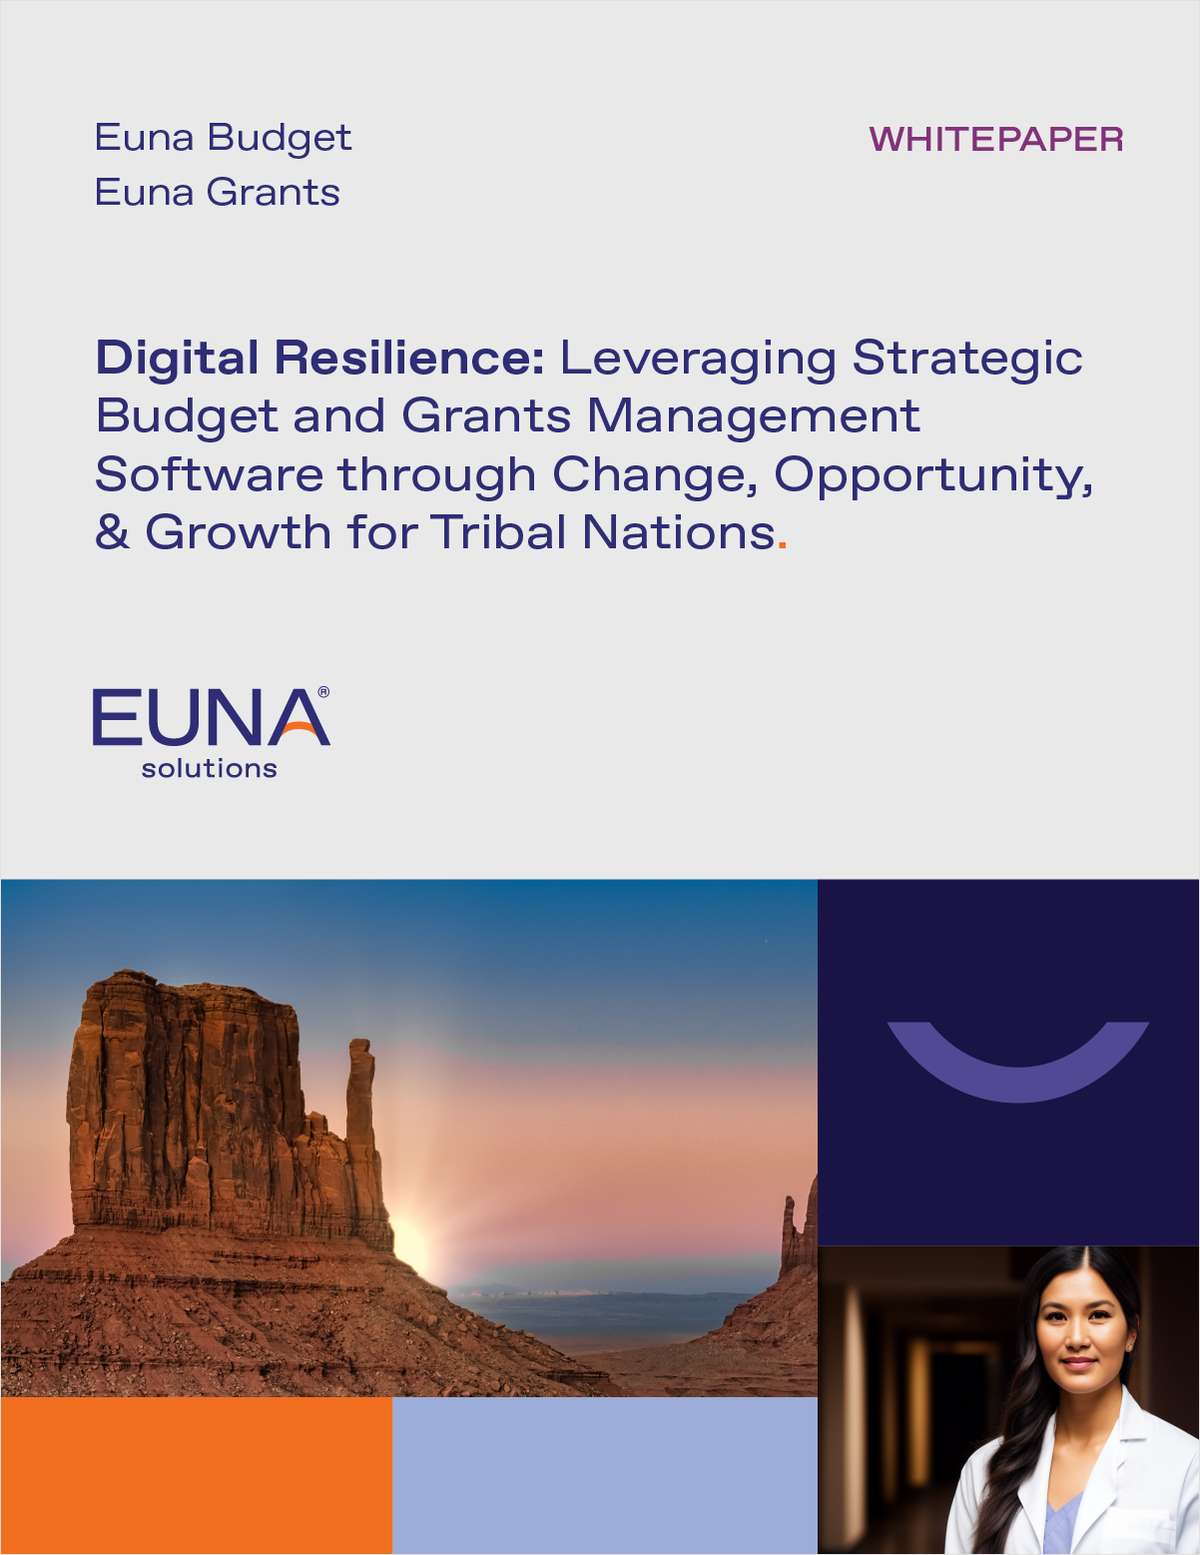 Empowering Tribal Nations: Achieving Community Impact Through Purpose-built Solutions